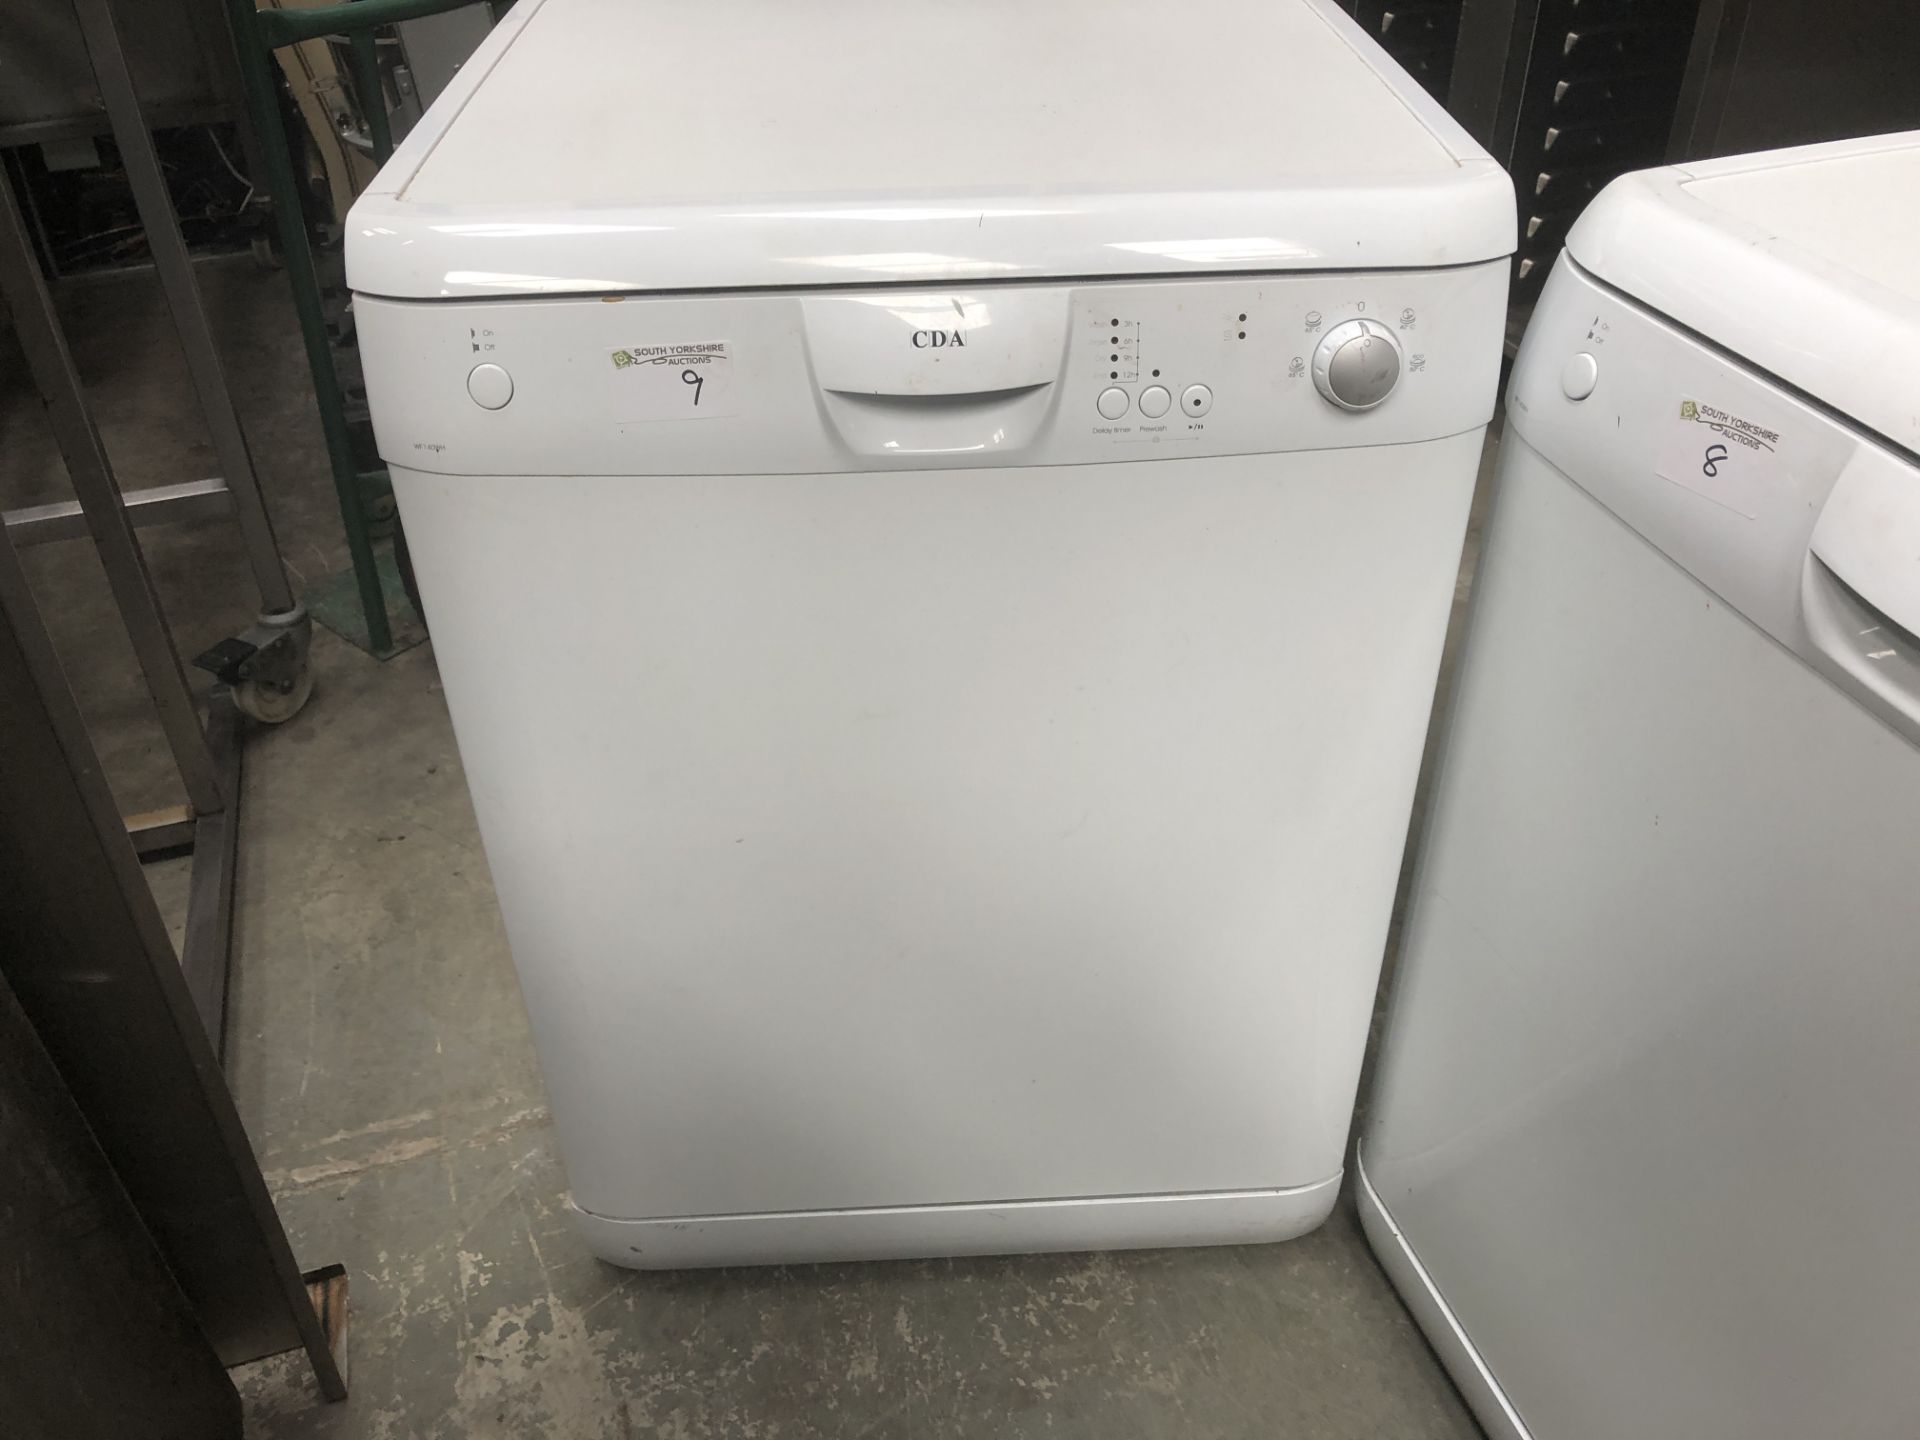 Domestic Dishwasher in Good Condition